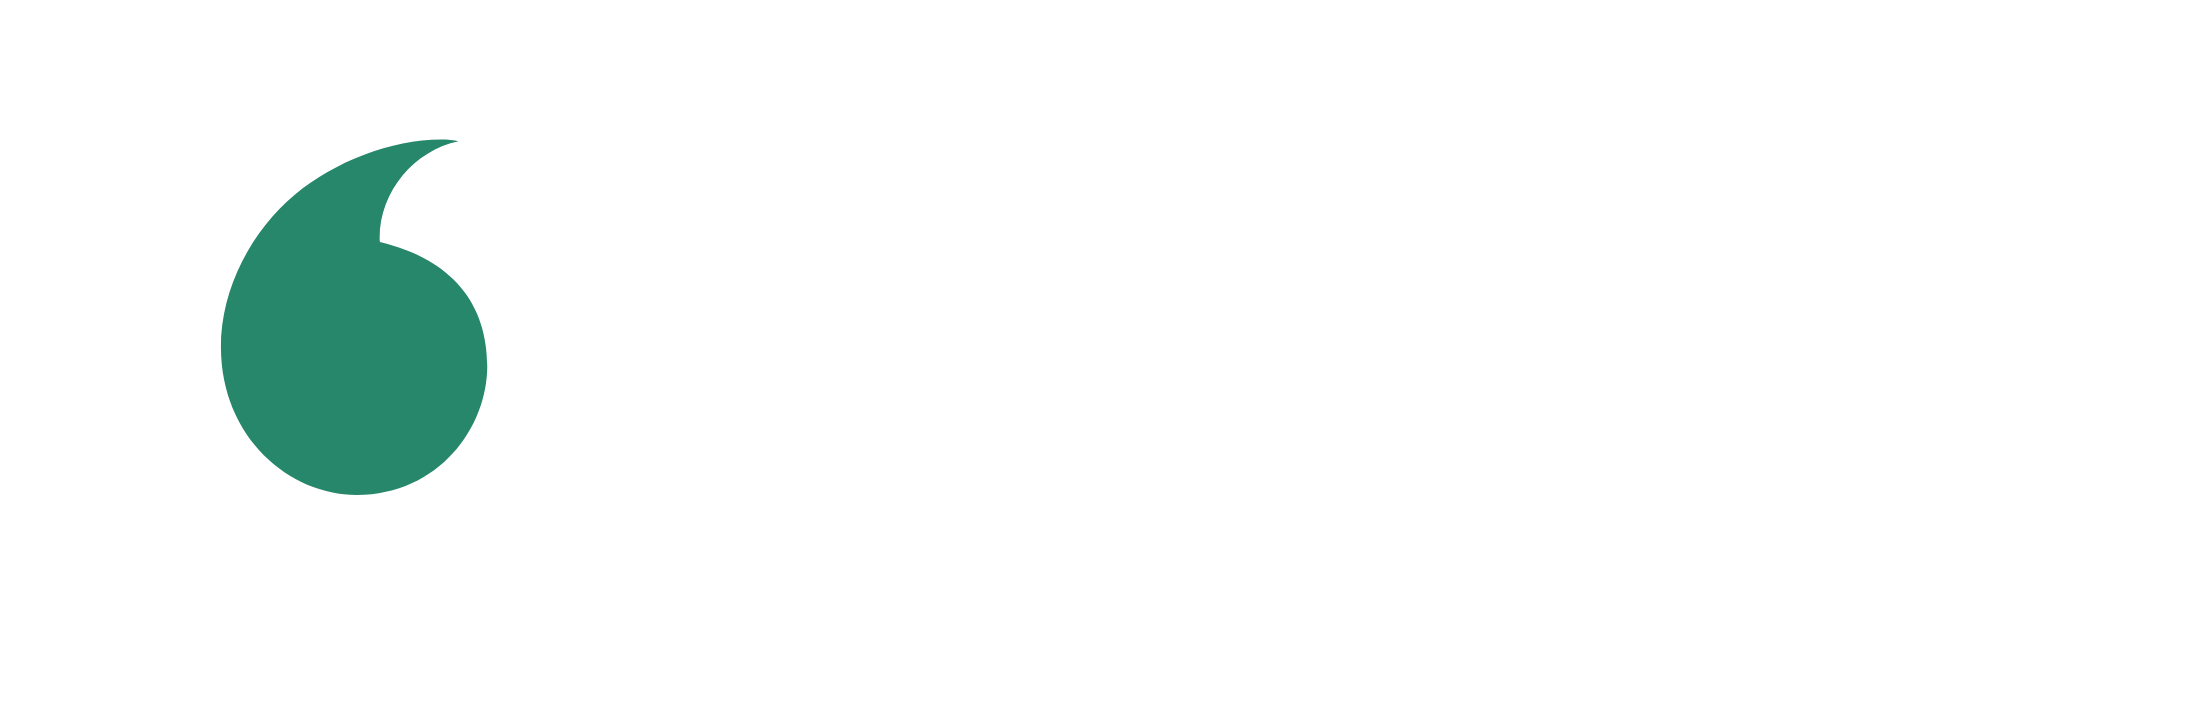 Vodafone company logo with a white background.